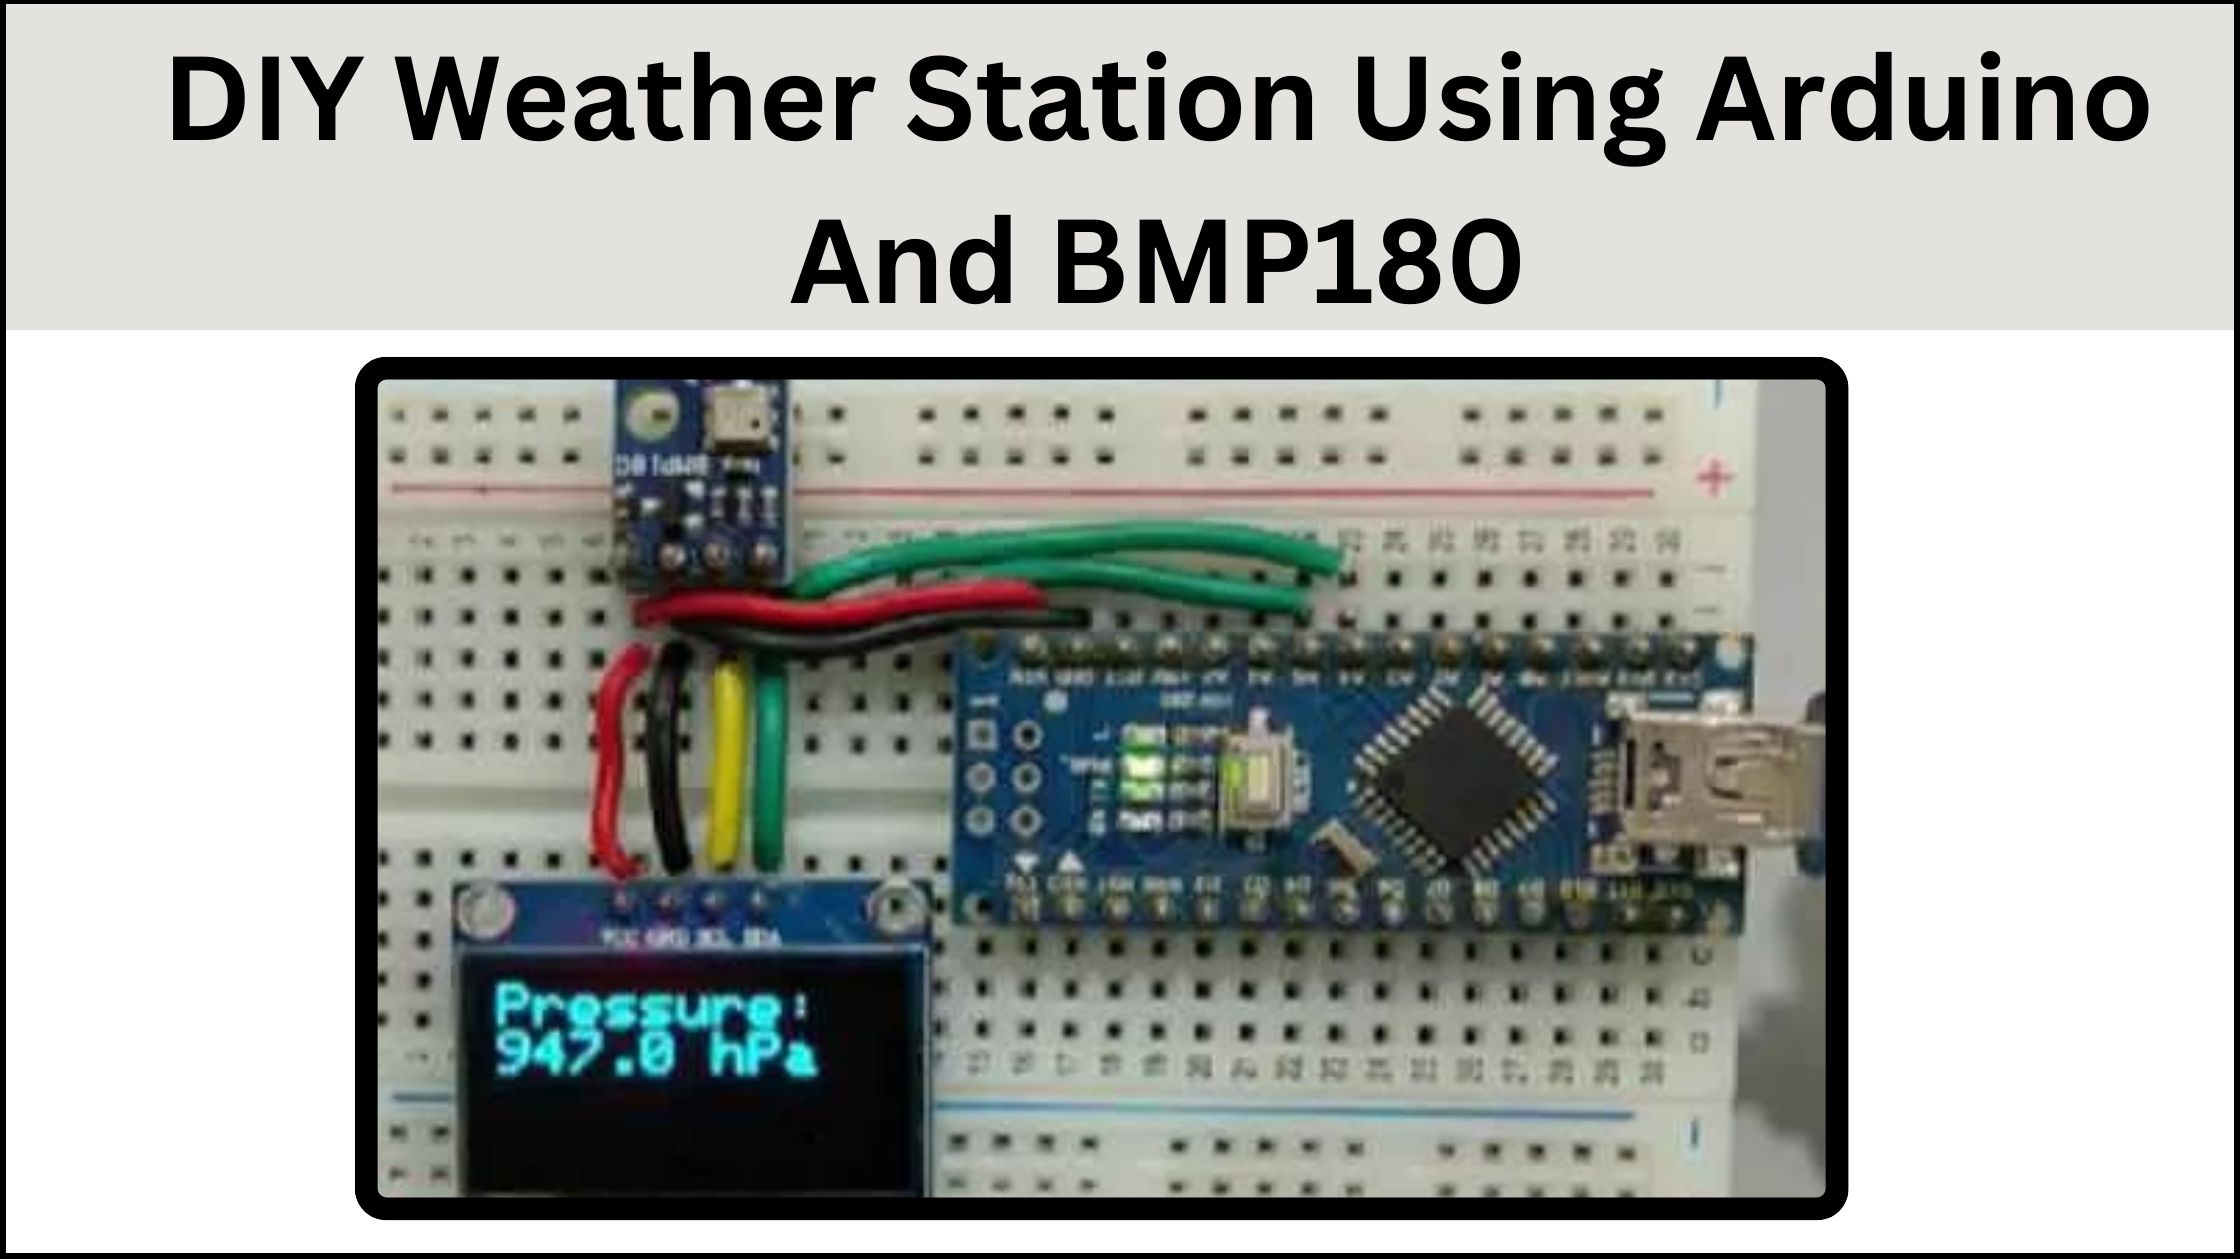 DIY weather station using arduino and BMP180